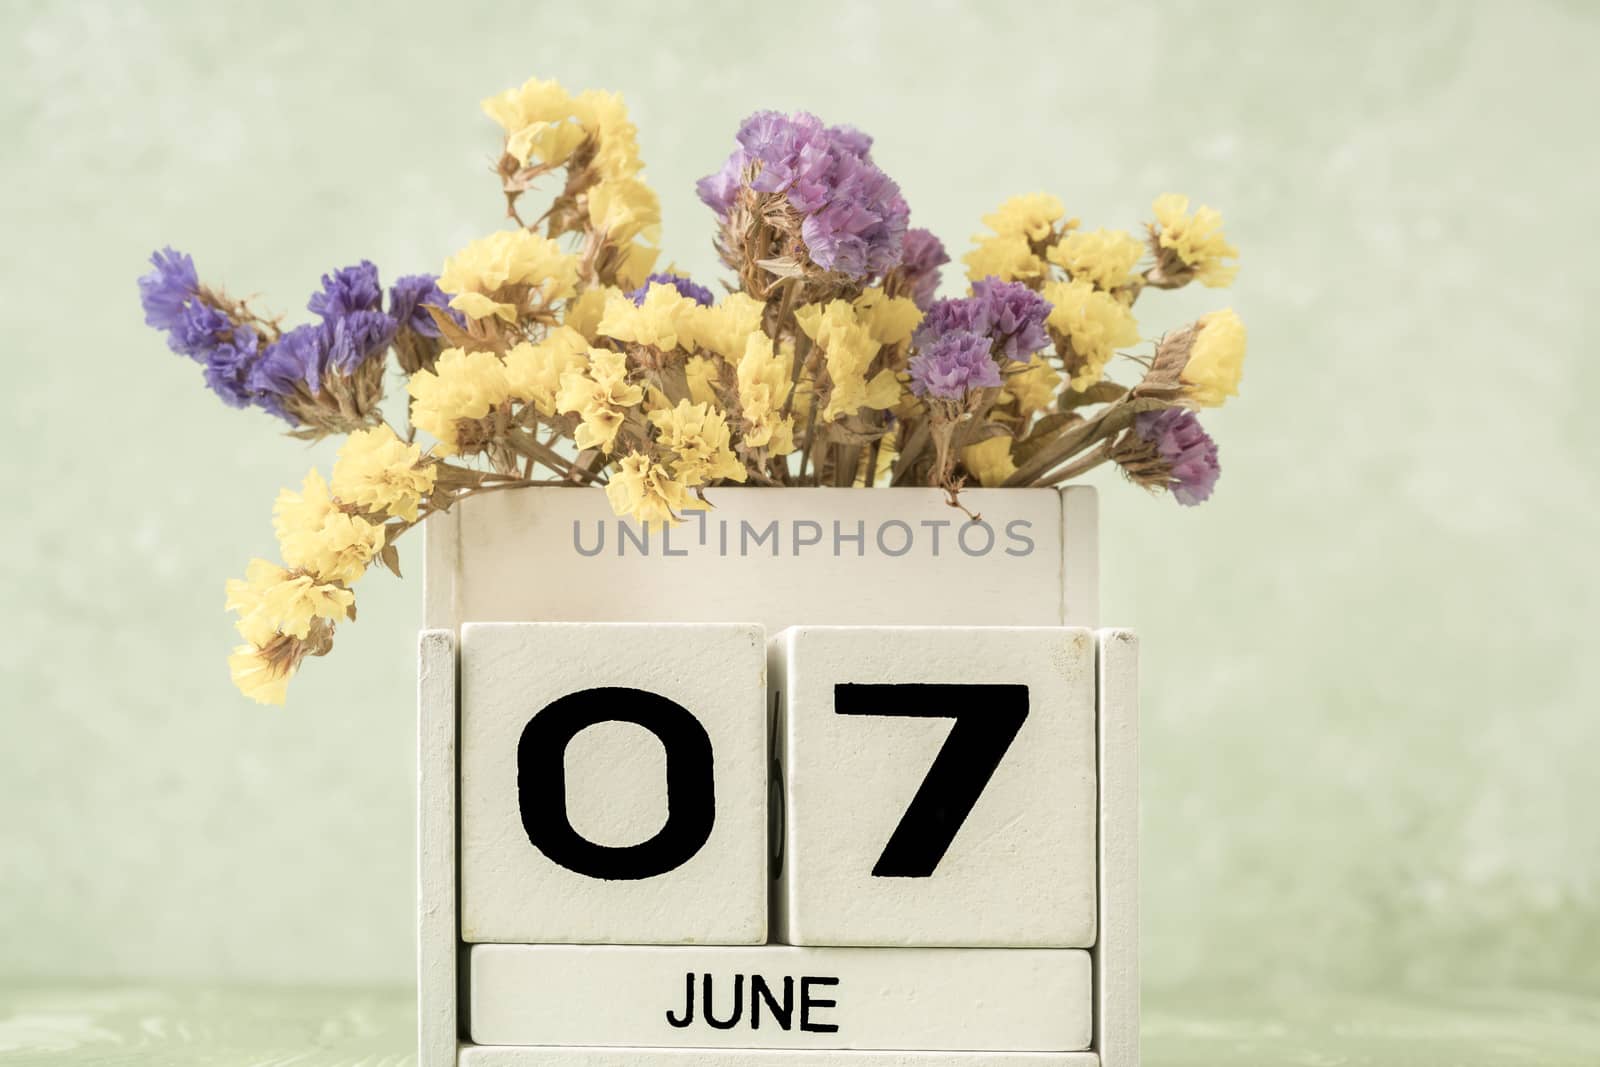 White cube calendar for june decorated with flowers over green background with copy space